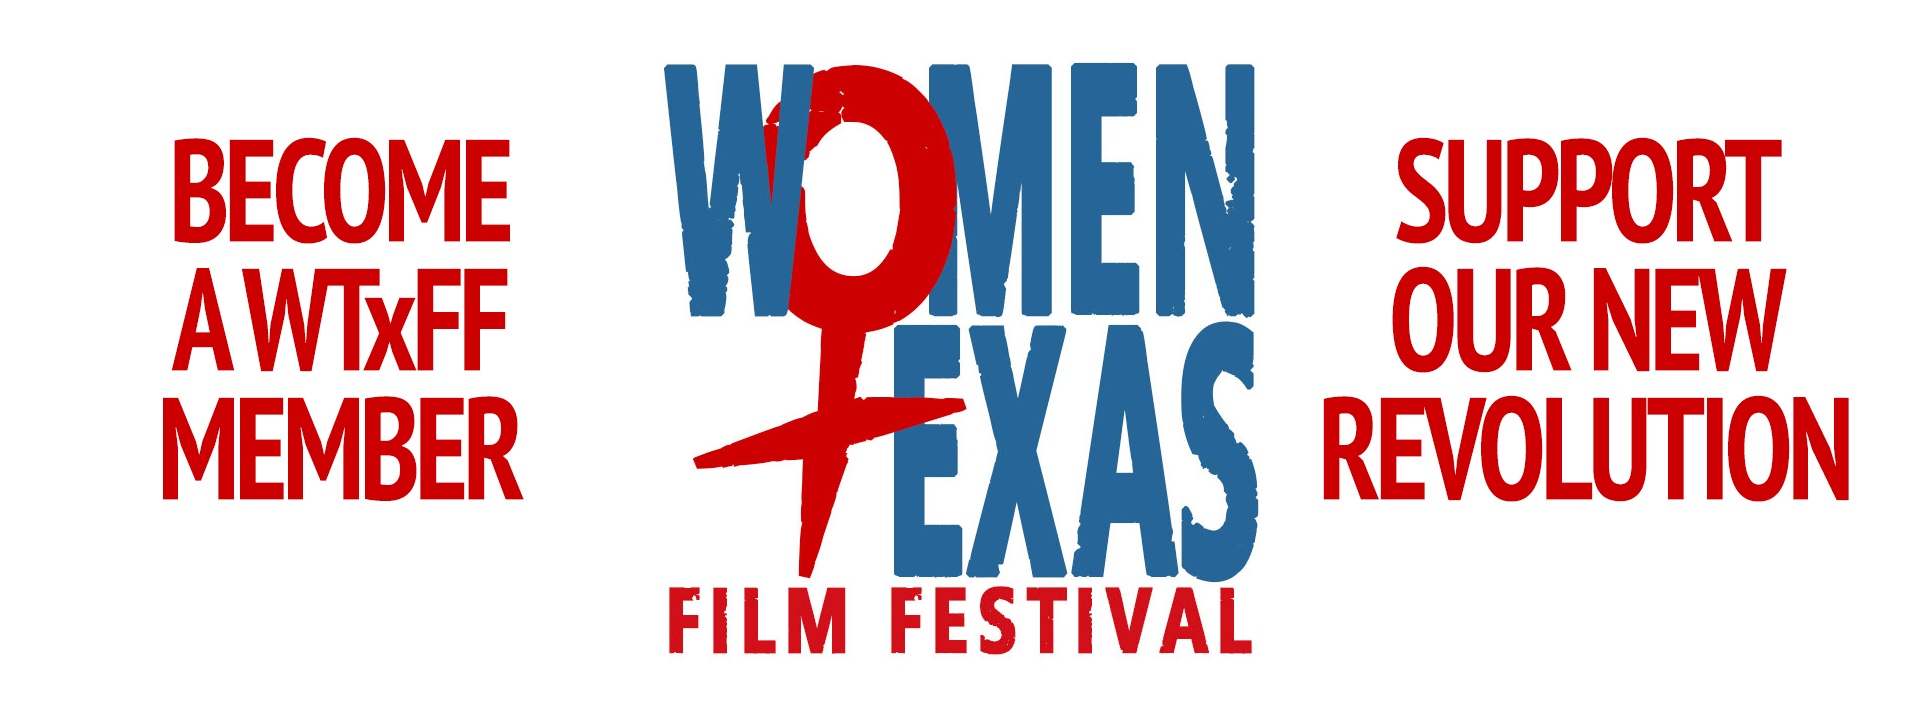 Become a WTxFF Member